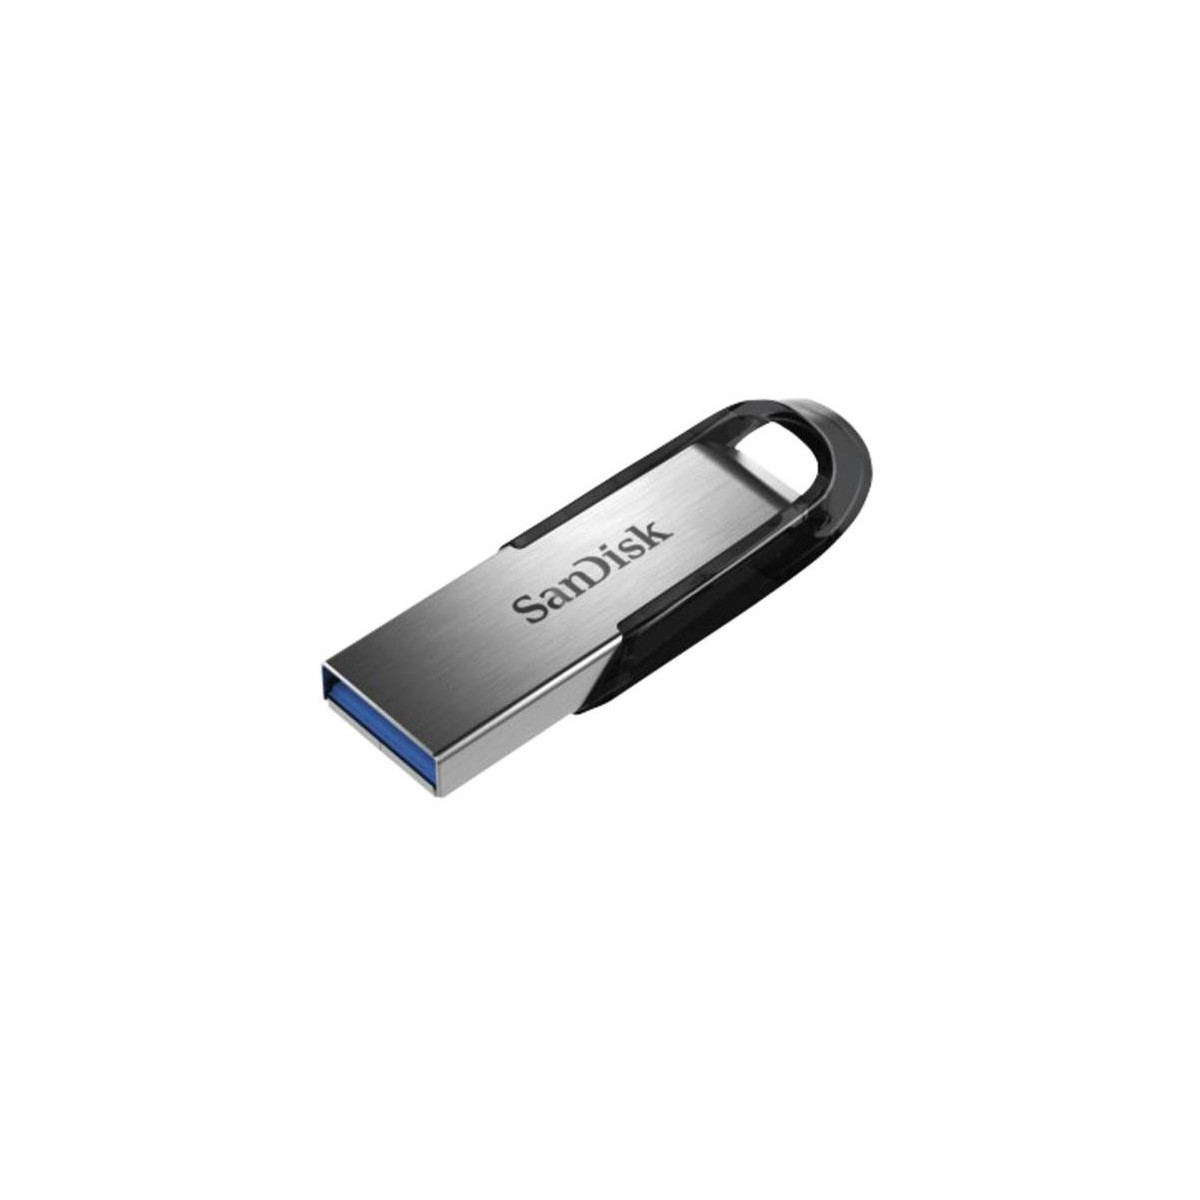 More about Flash disk SANDISK Ultra Flair 3.0 128GB 139790